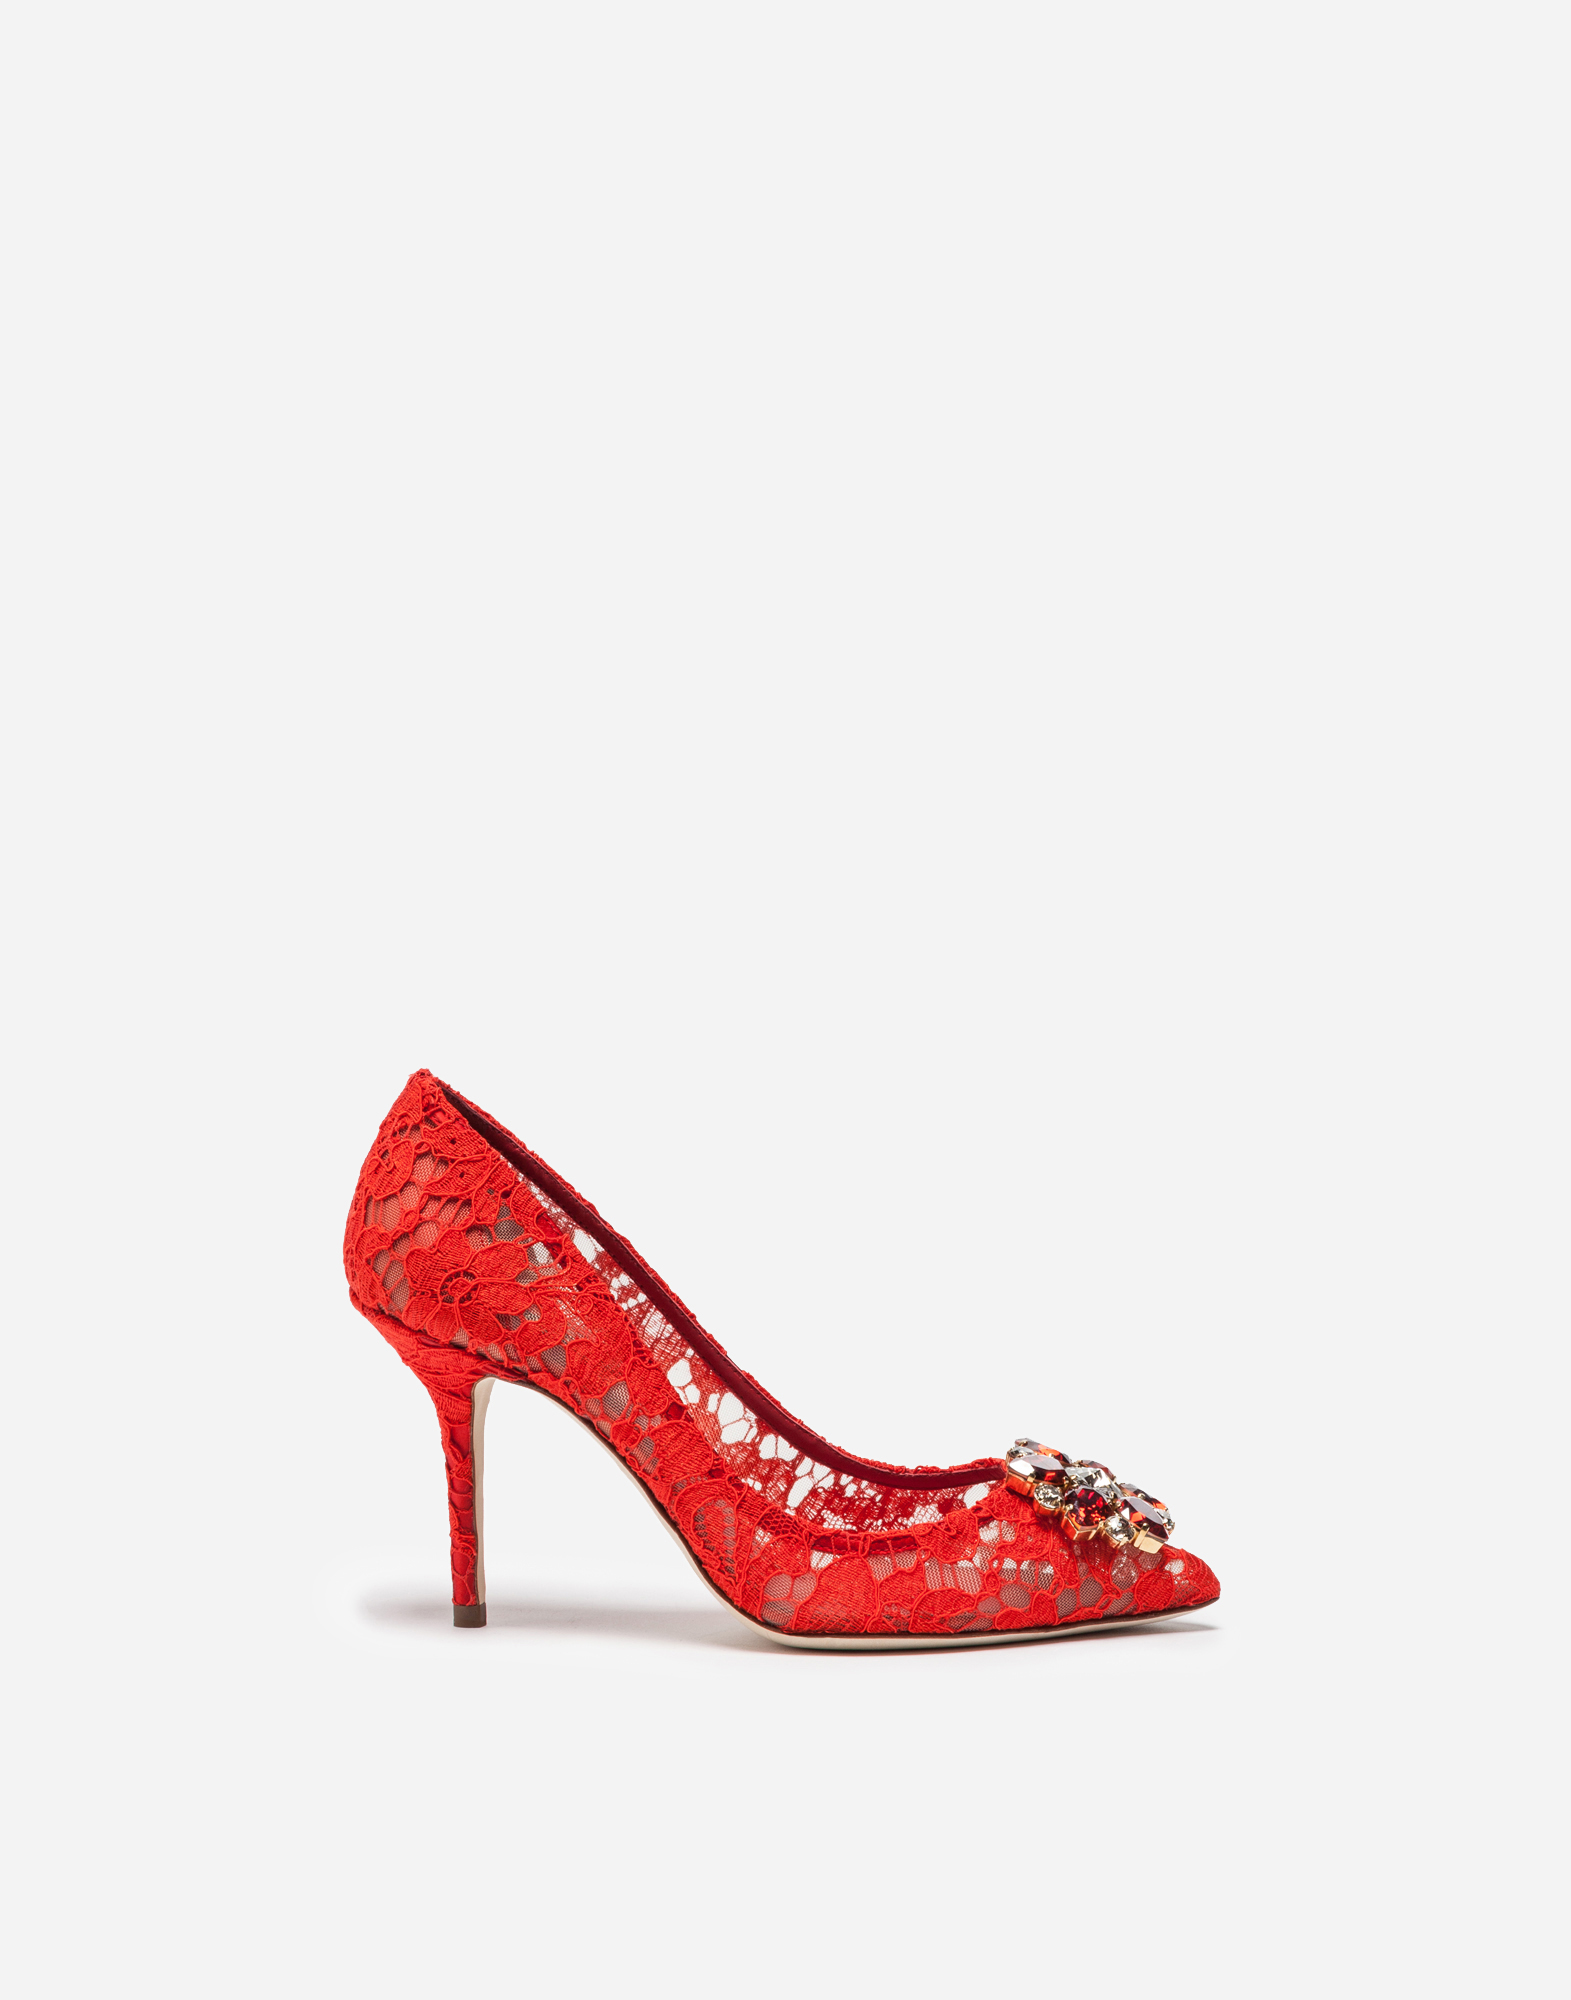 Lace rainbow pumps with brooch detailing in Red